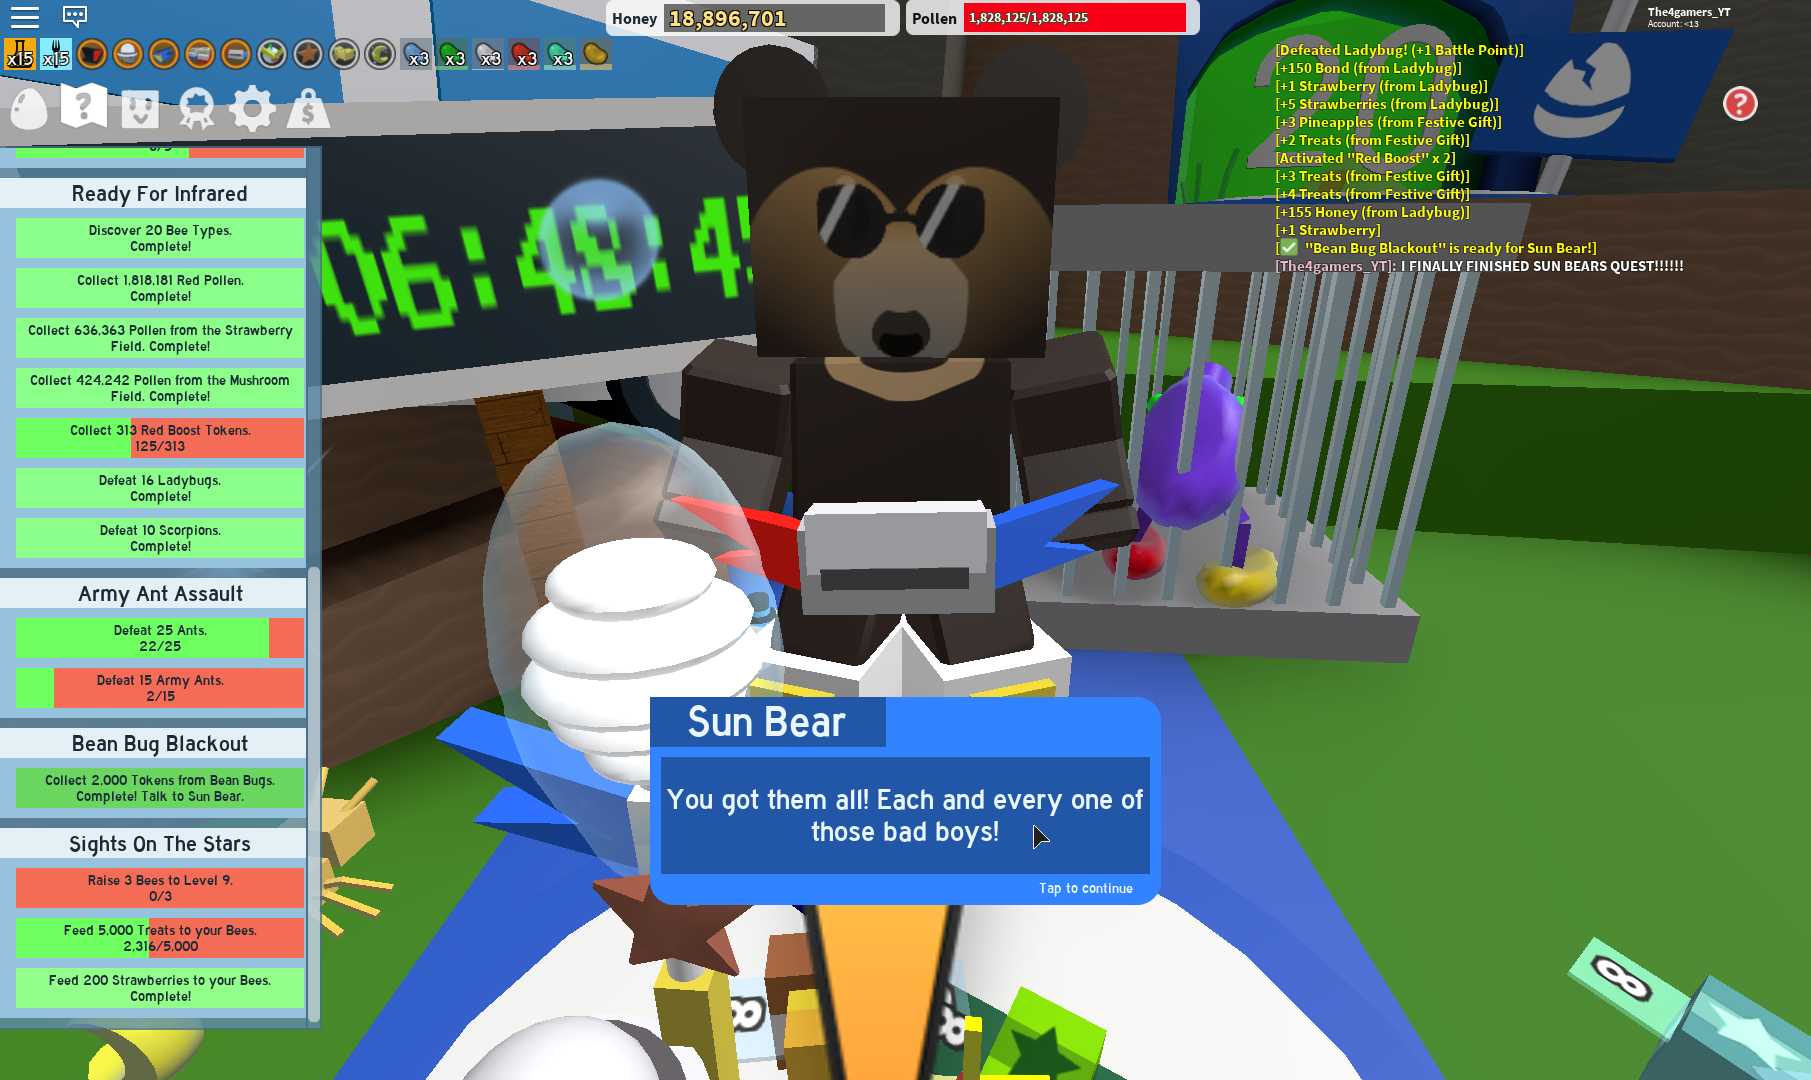 Discuss Everything About Bee Swarm Simulator Wiki Fandom - roblox bee swarm simulator all sun bear quests get robux quiz